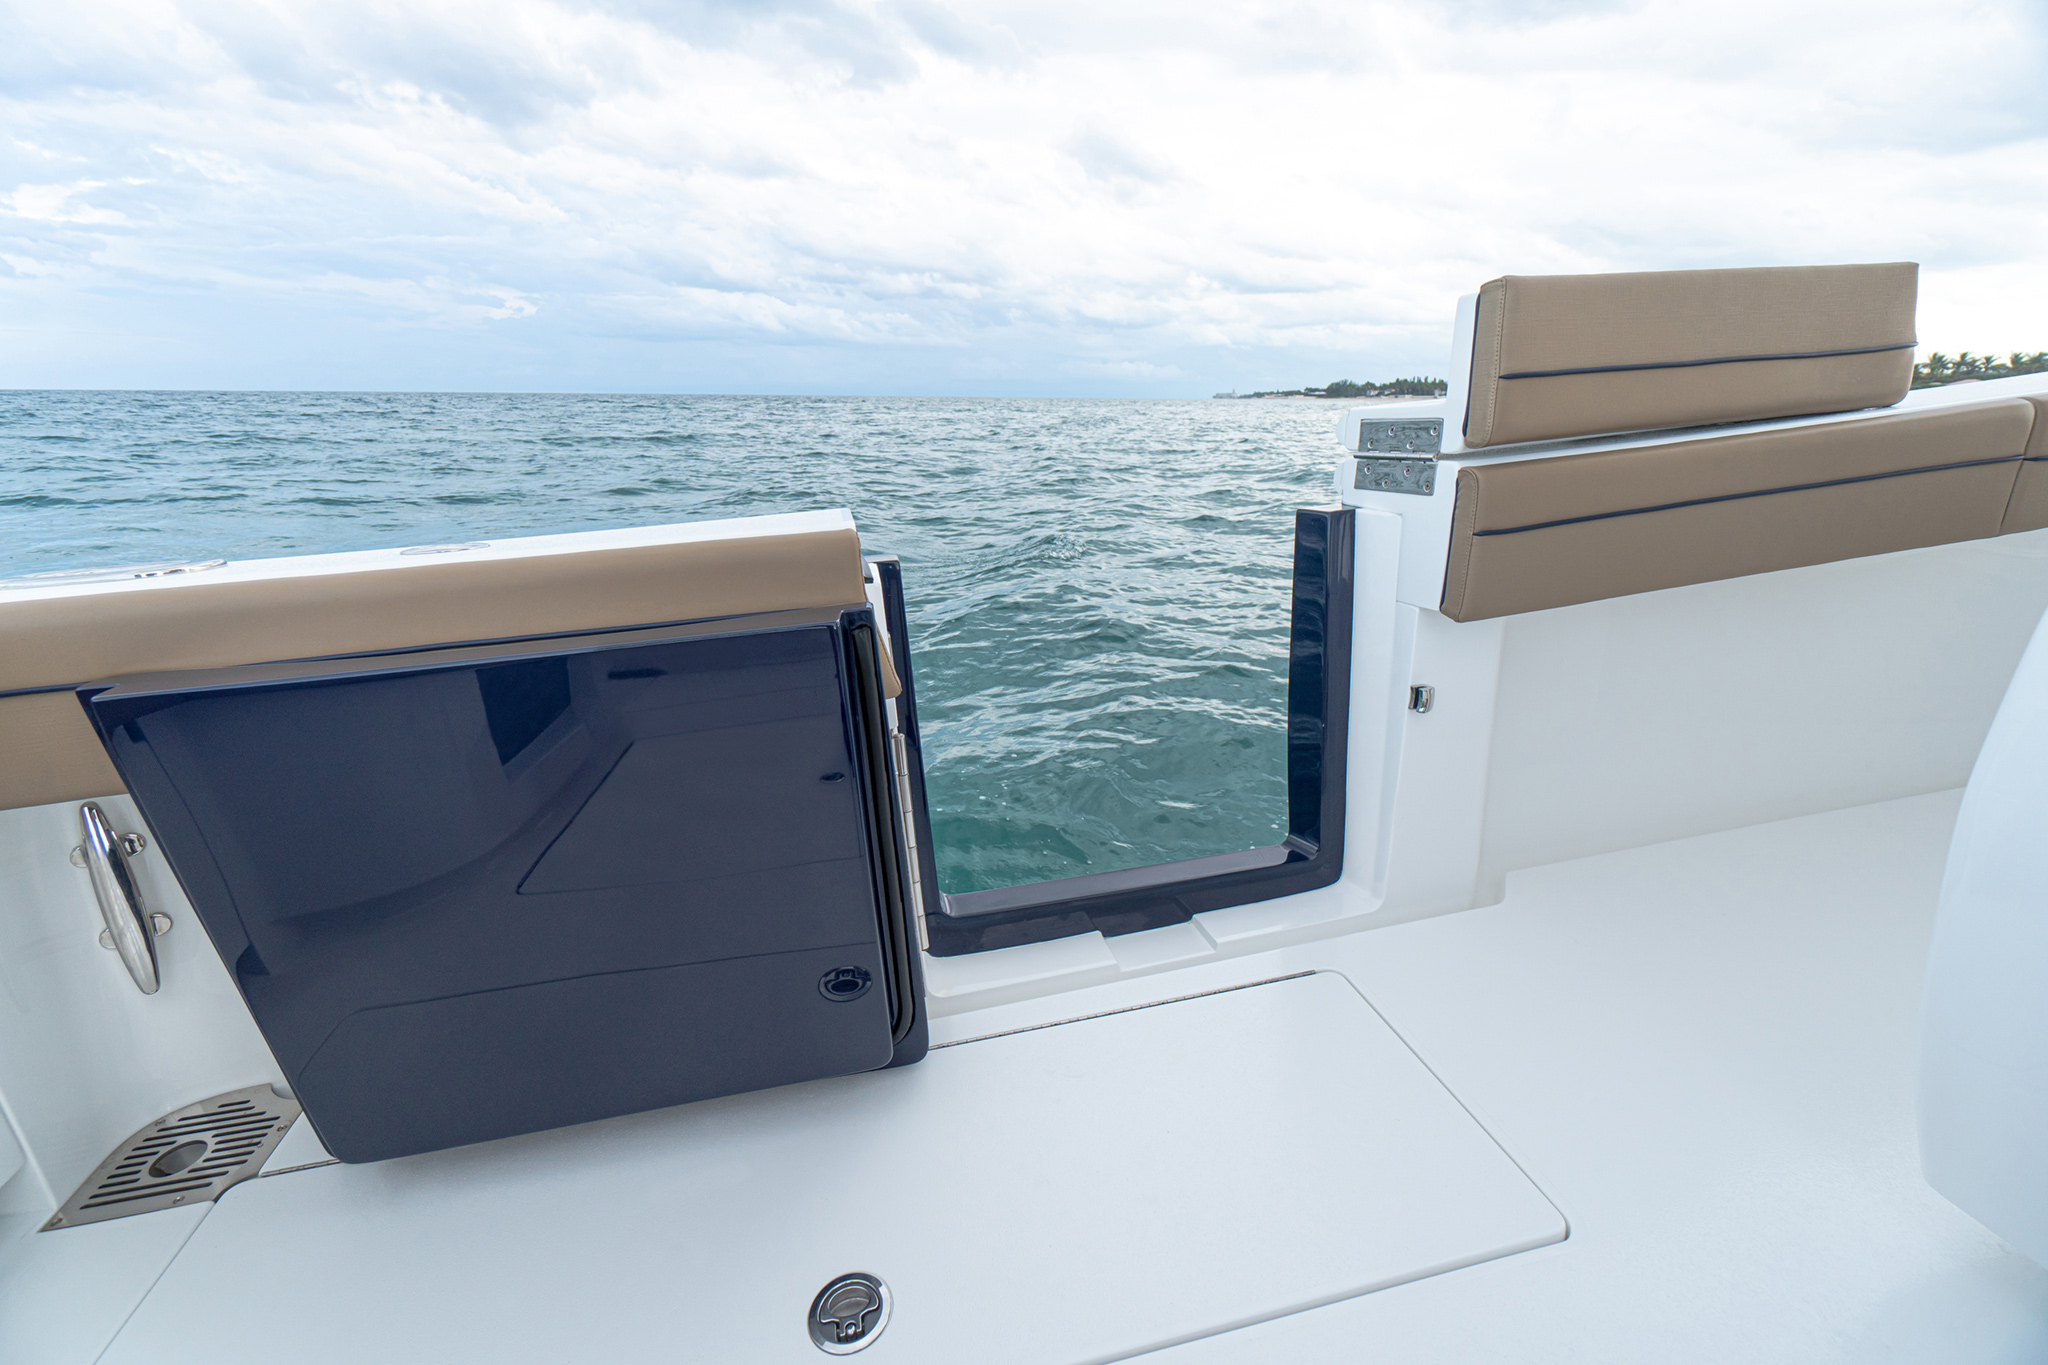 Standard port-side dive door swings inboard 180 degrees for safety and convenience.